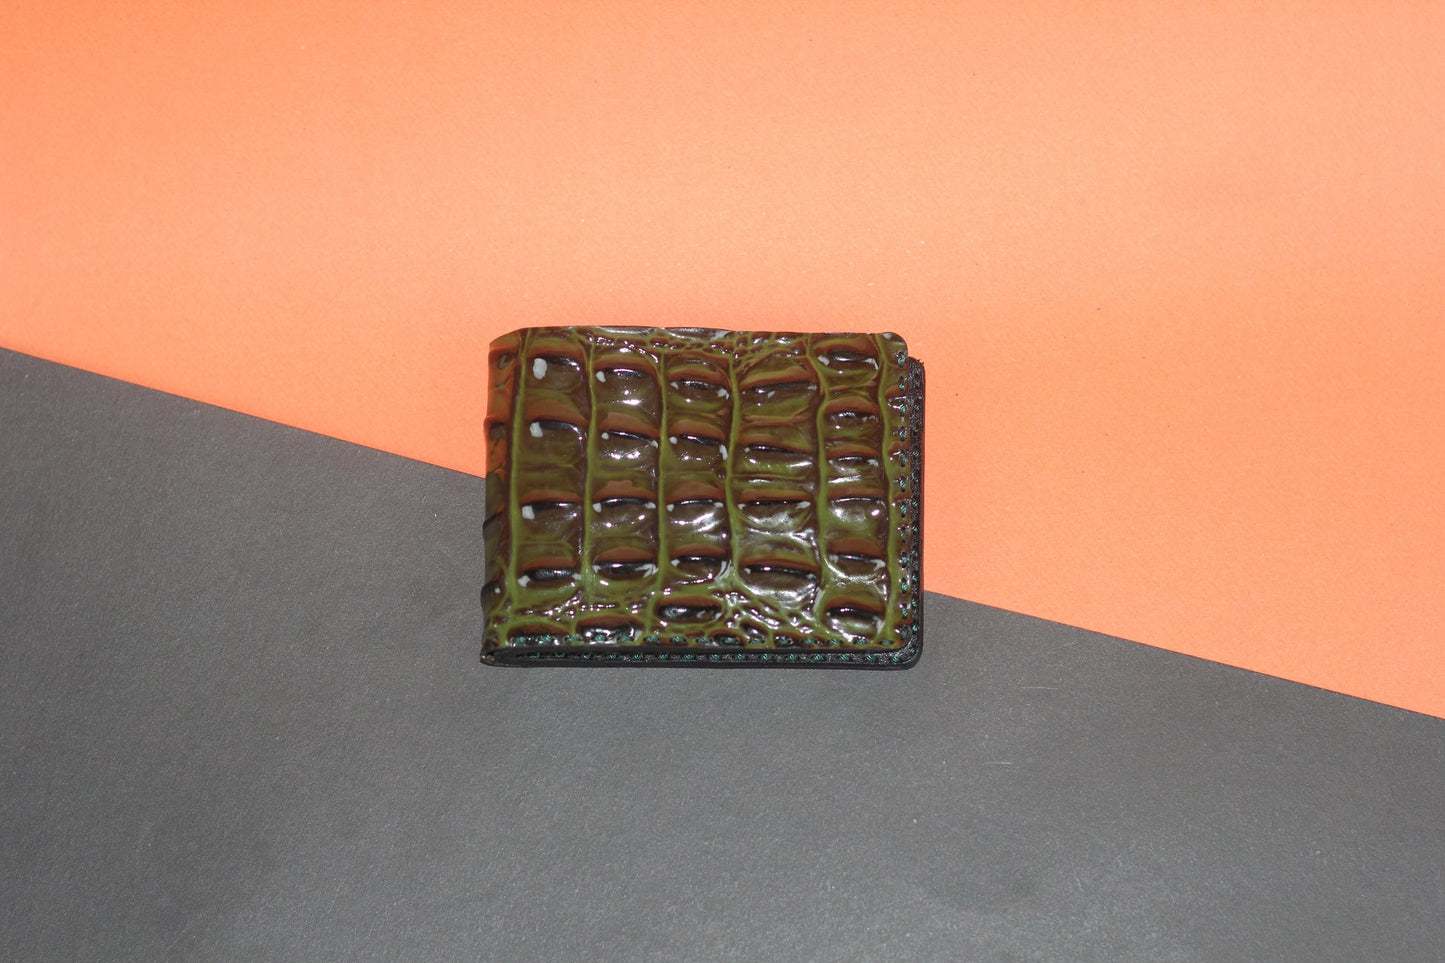 Unisex Genuine Leather Wallet With High-Glossed Dark Green Crocodile Textured Finish | Exotic Bifold Mini Wallet